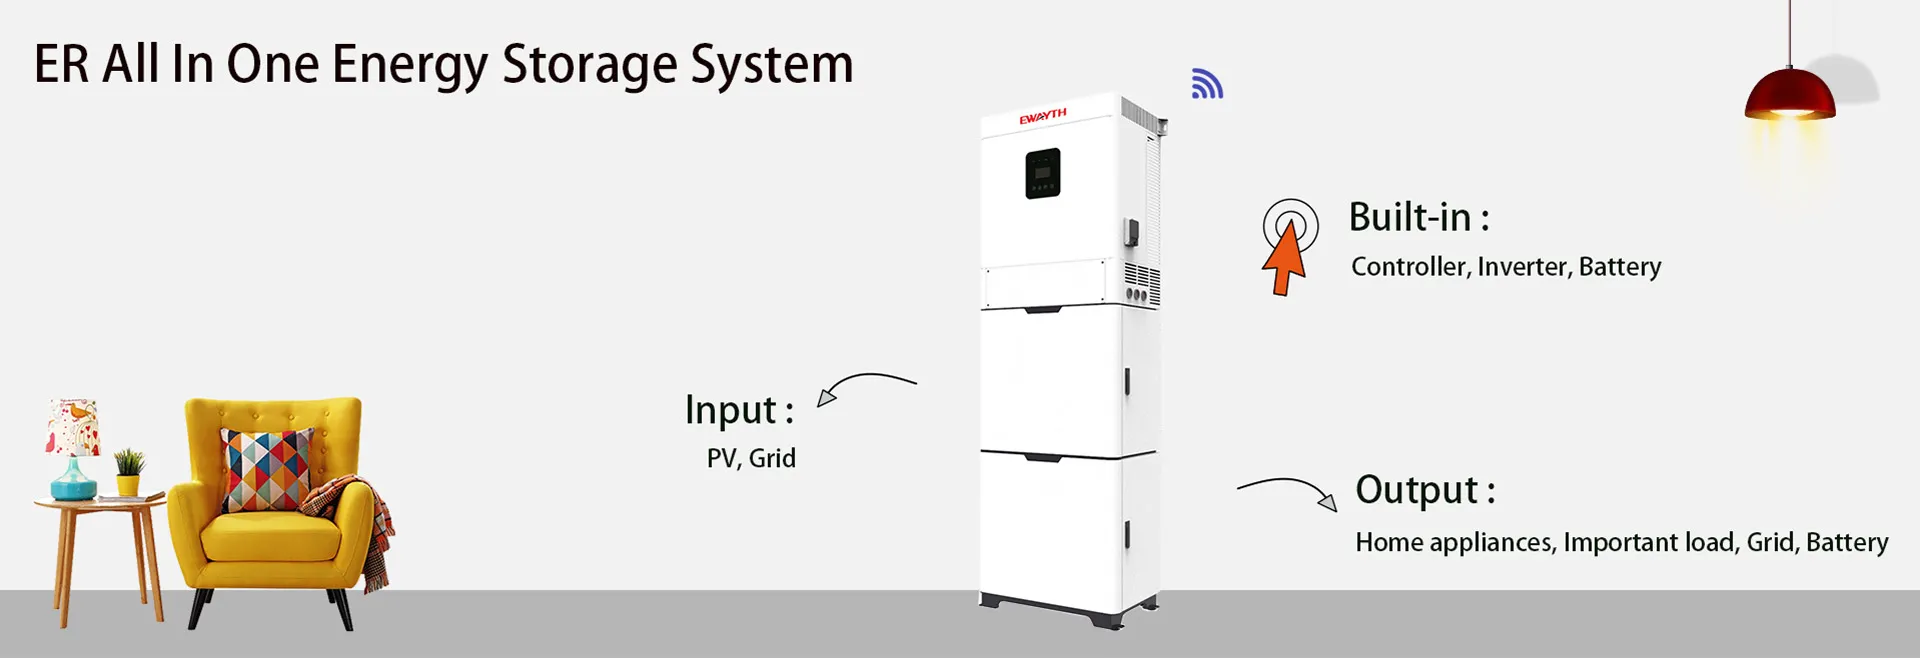 ER All In One Energy Storage System